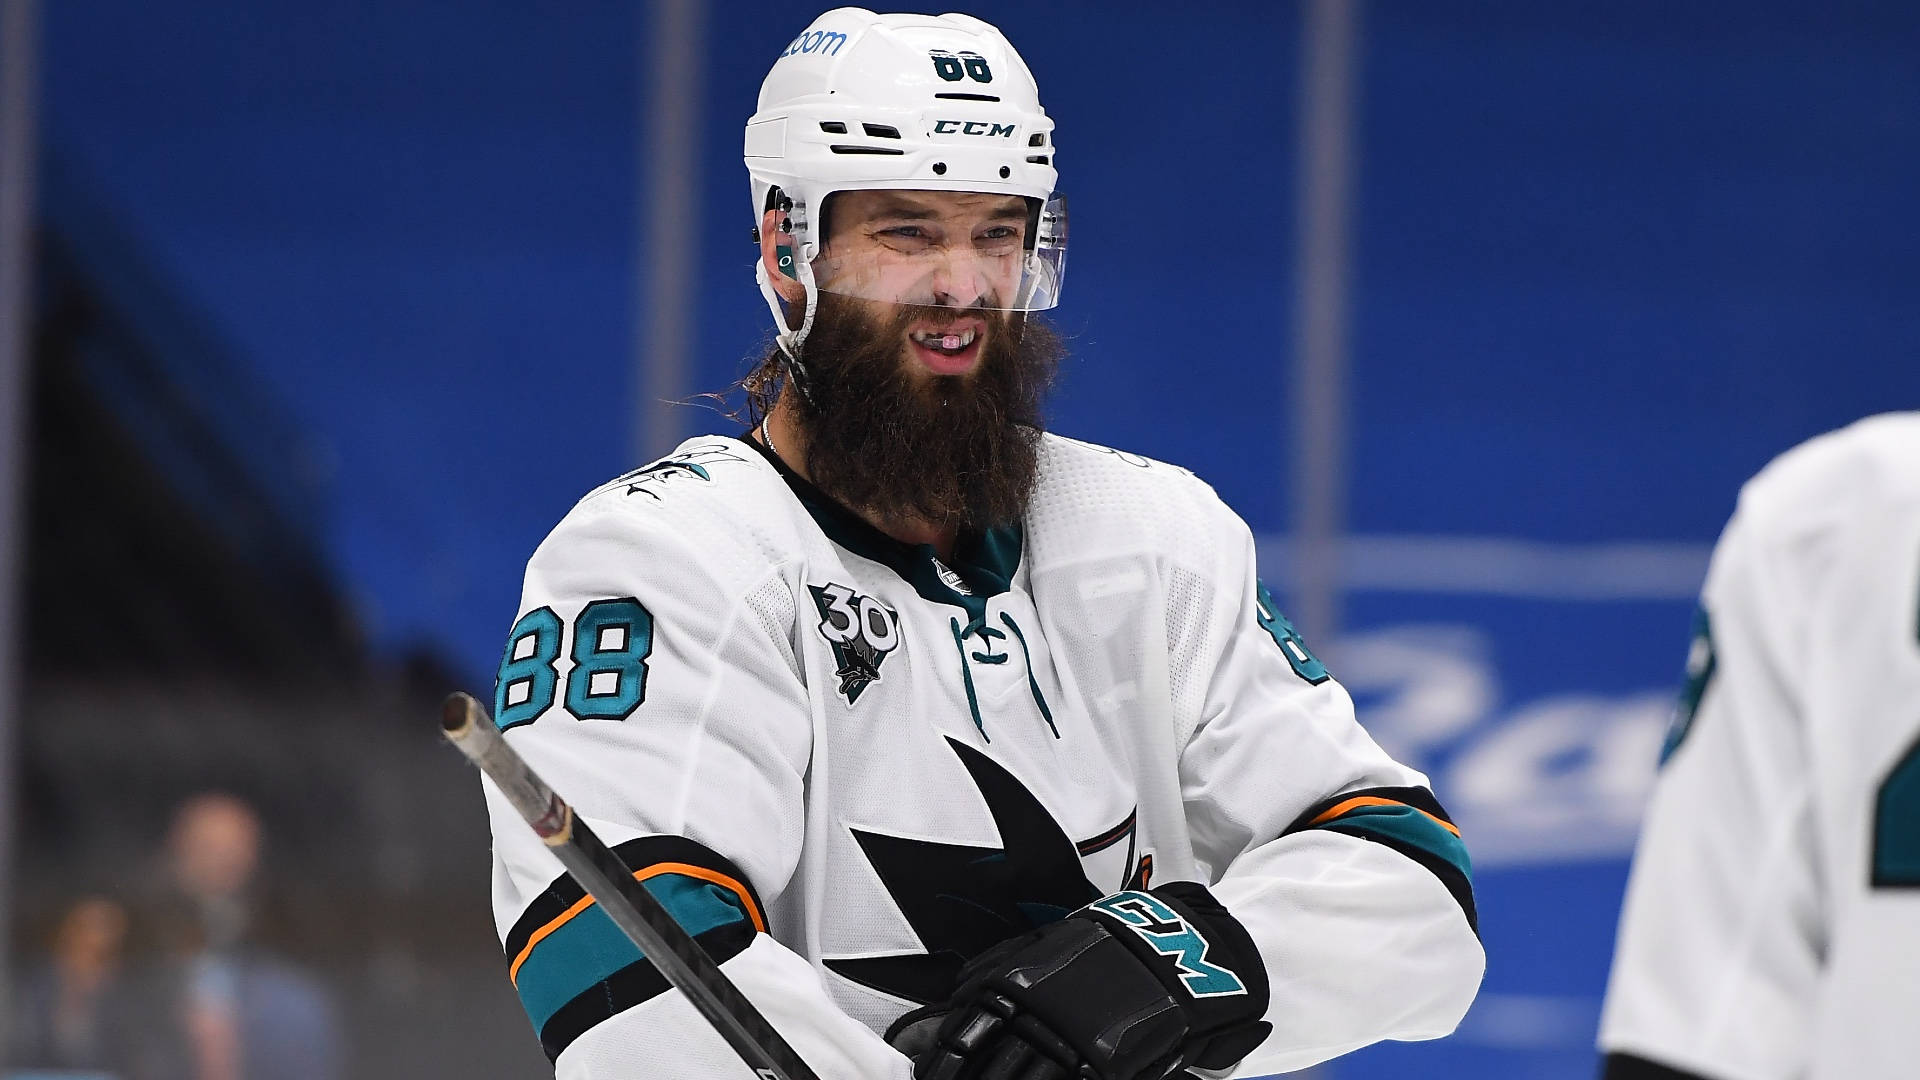 Download Brent Burns Ice Hockey Player Laughing Wallpaper